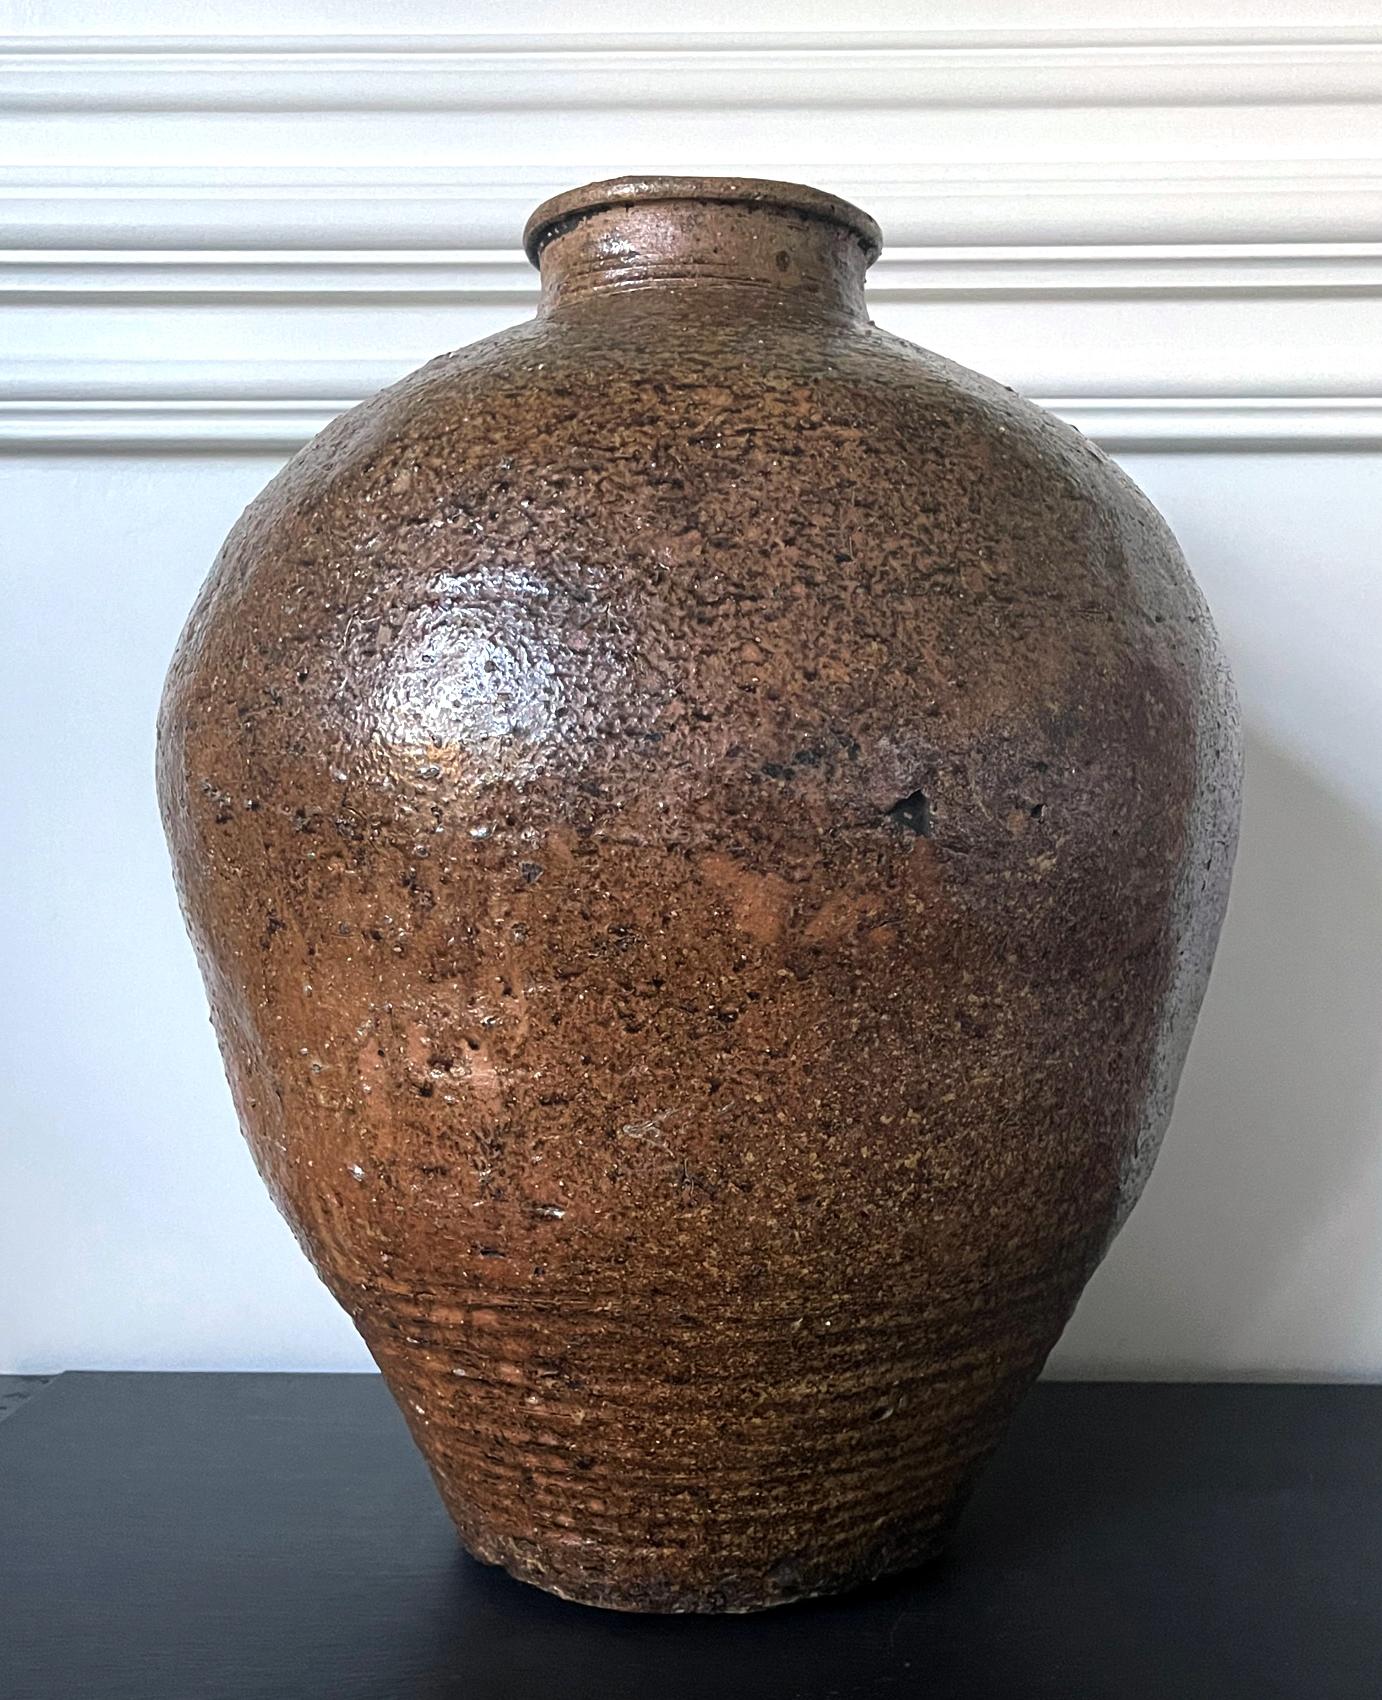 A massive antique stoneware storage jar (known as tsubo in Japanese) circa 16-17th century (Muromachi to early Edo period). The heavily potted jar is of a typical 